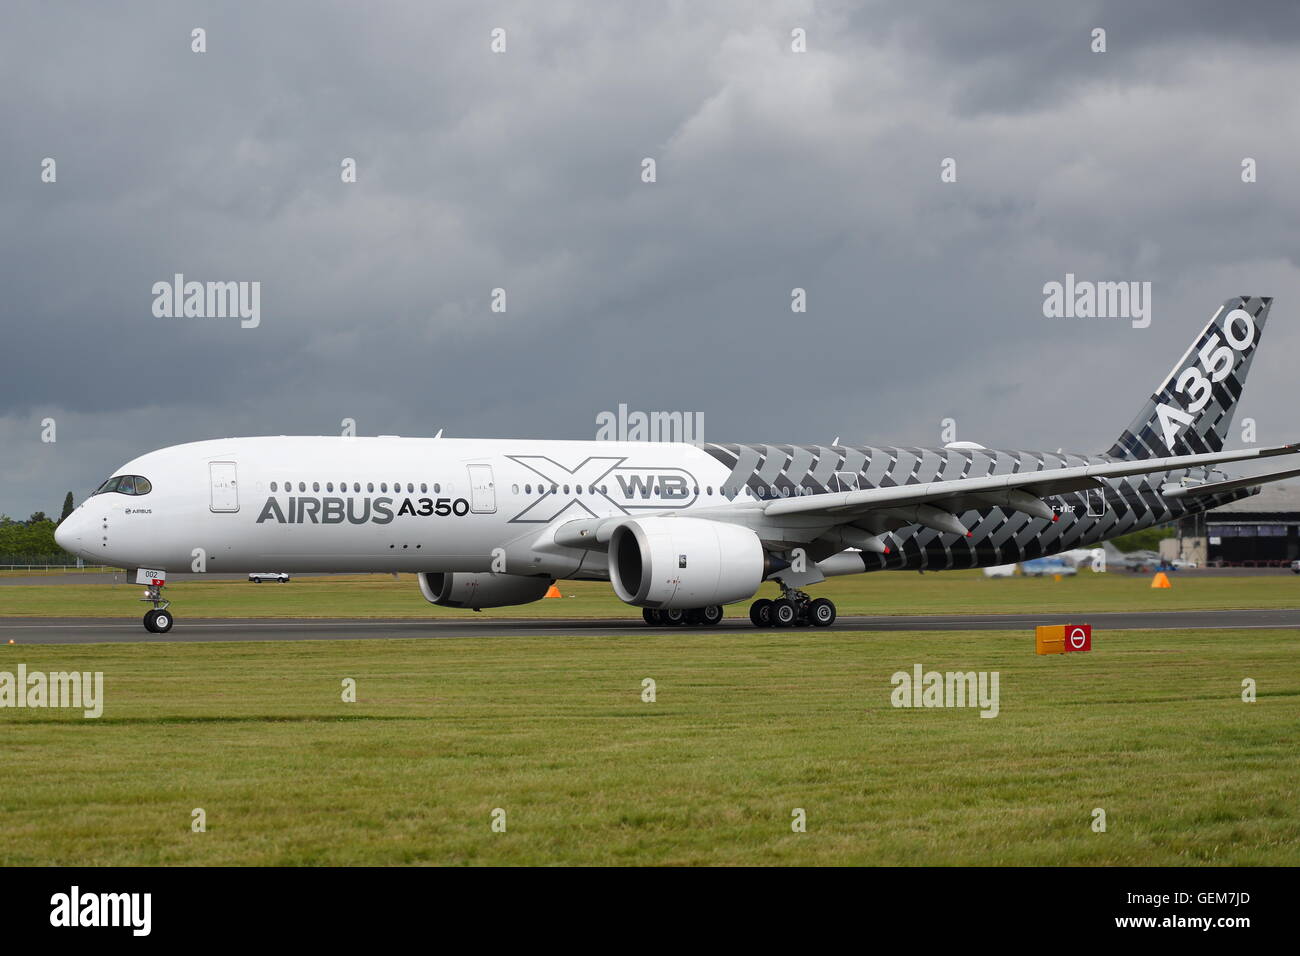 The Airbus A350 on the runway at the Farnborough International Airshow 2016 Stock Photo